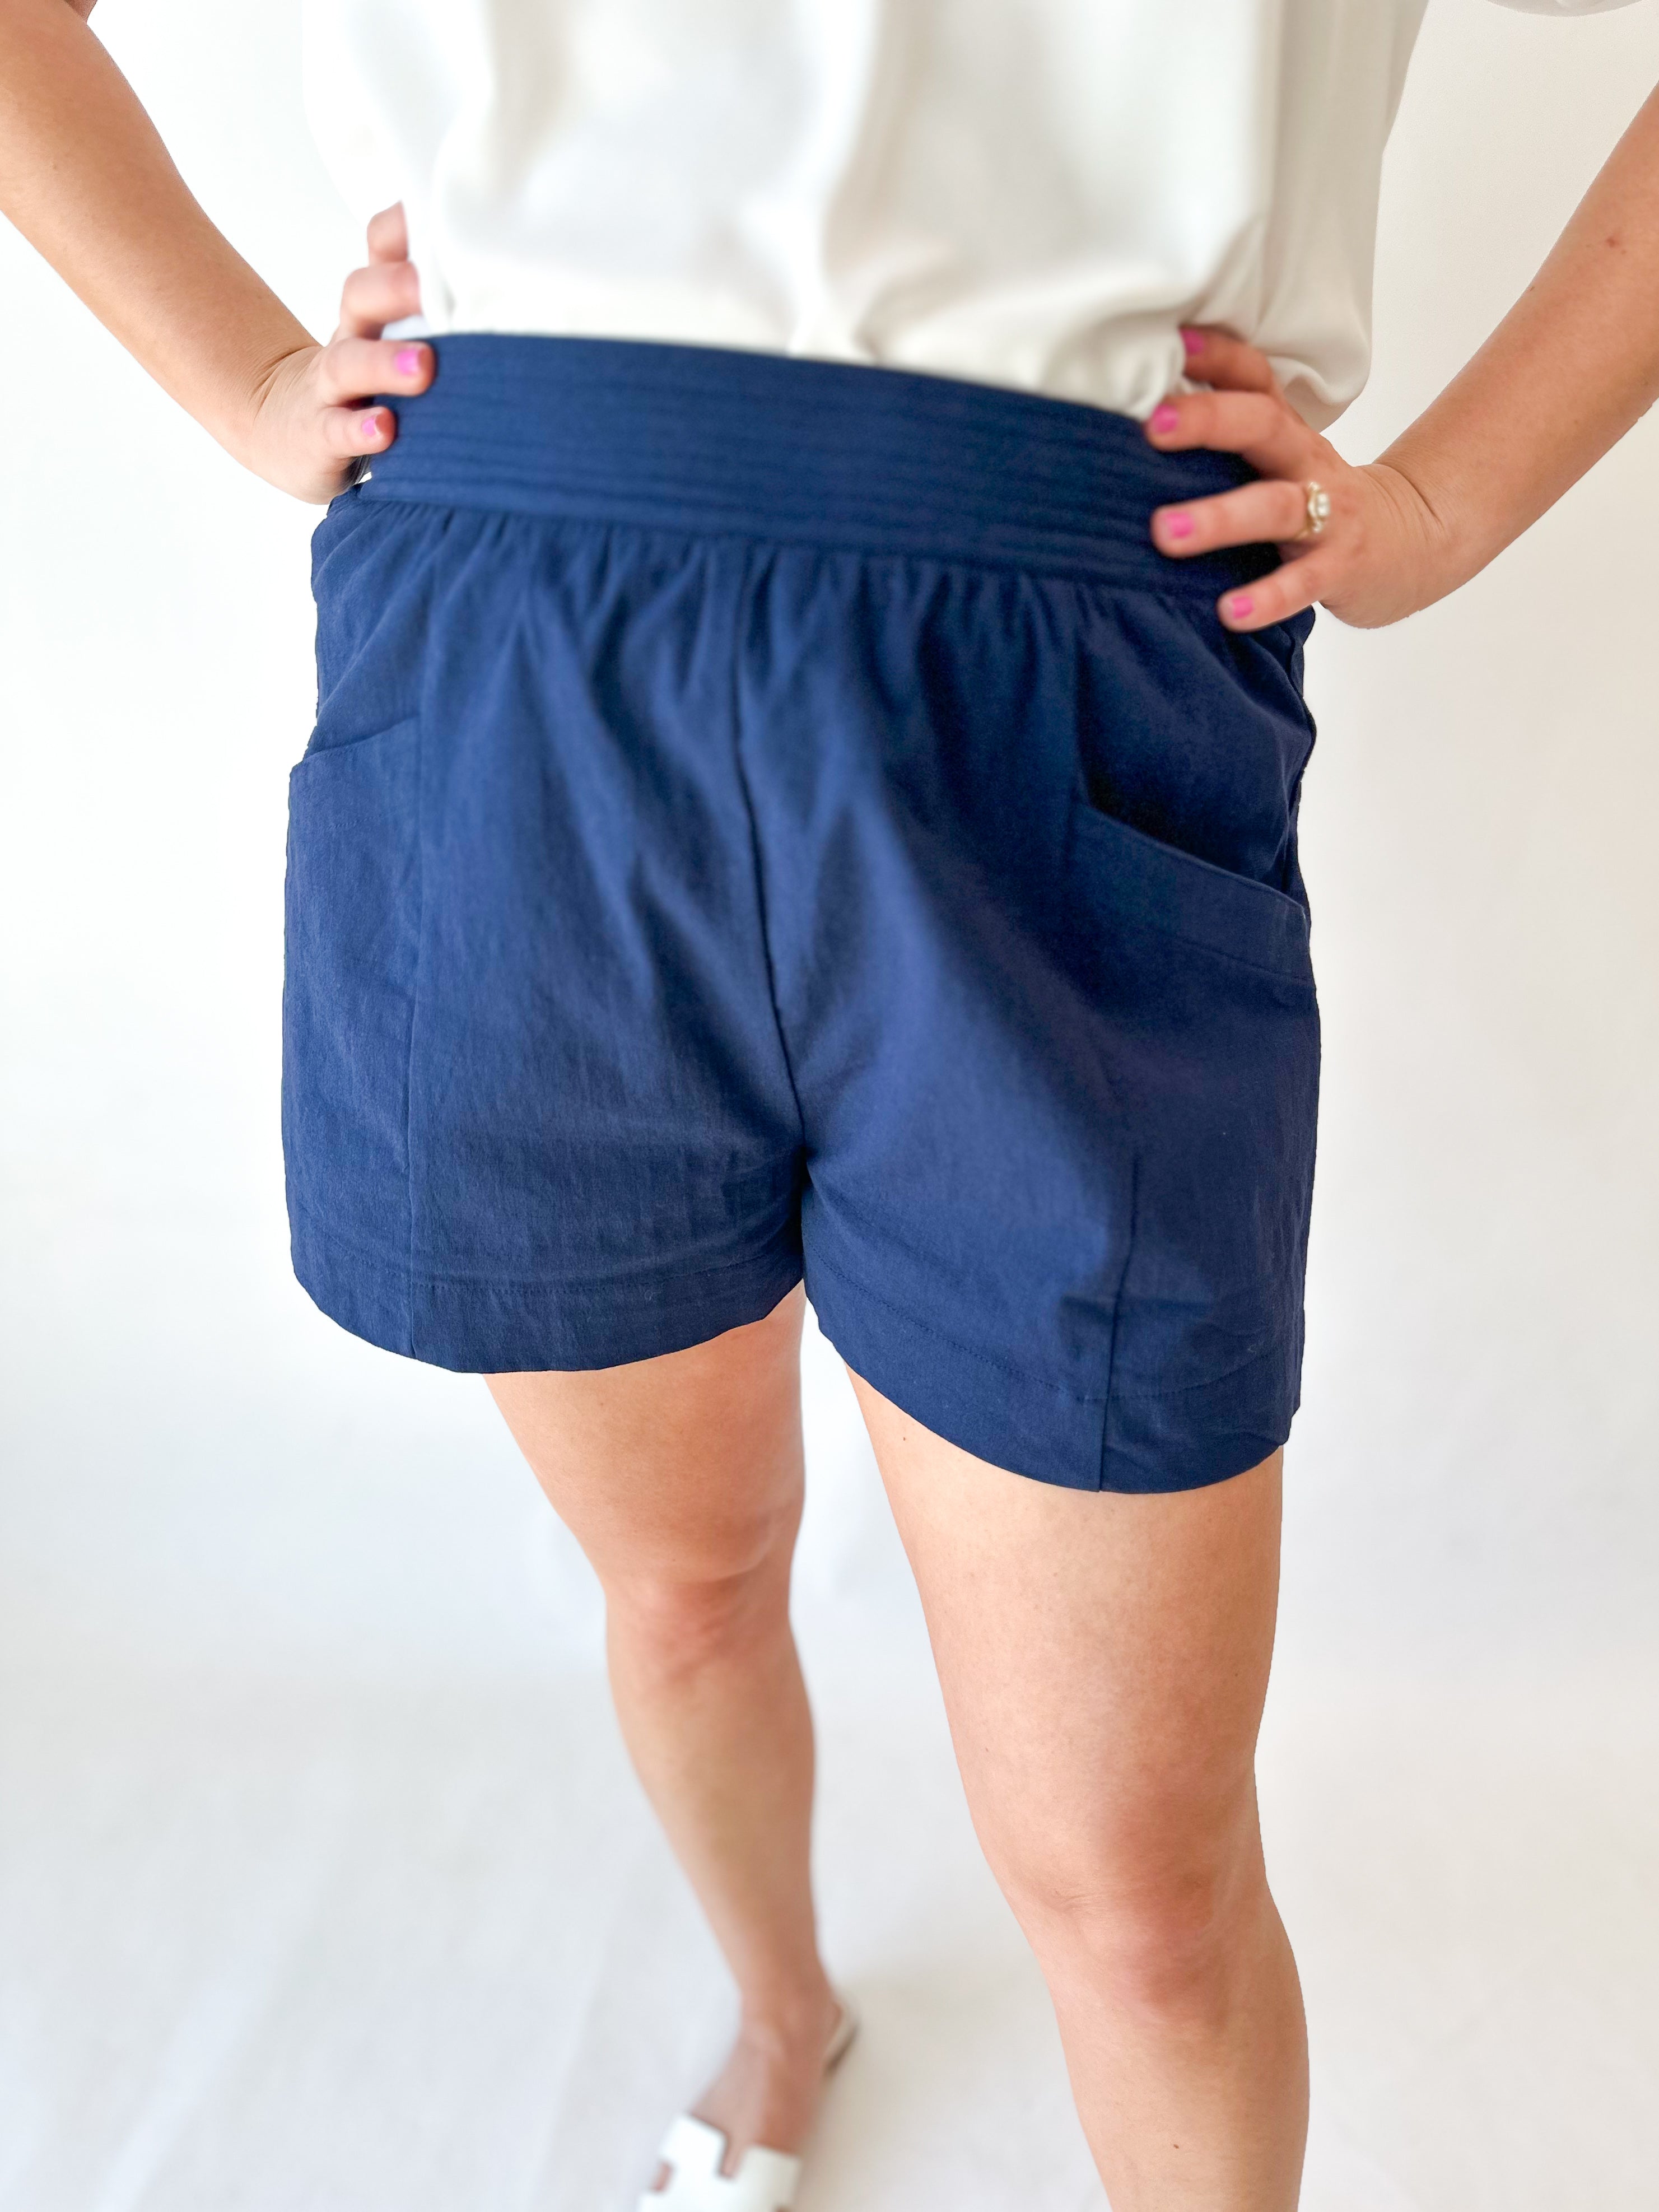 The Everyday Short - Navy-410 Shorts/Skirts-ENTRO-July & June Women's Fashion Boutique Located in San Antonio, Texas